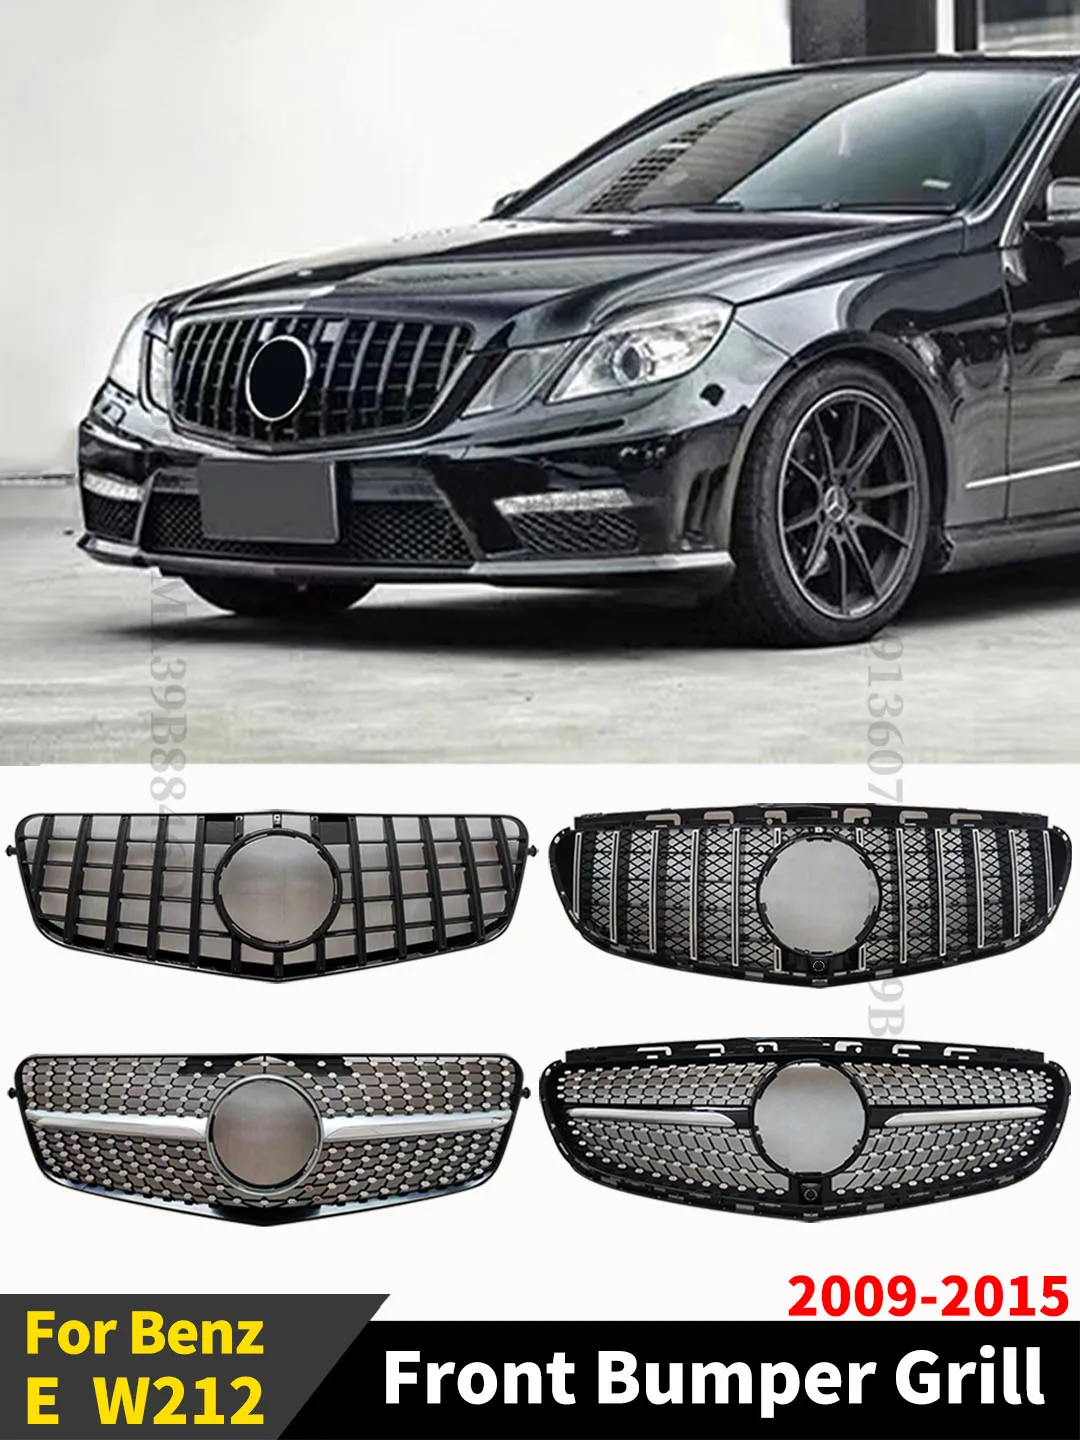 https://ae01.alicdn.com/kf/S588d2315ec014c0ea5994742bb7a0d42B/Front-Inlet-Grille-Radiator-Grid-Grill-Tuning-Hood-Body-Kit-For-Mercedes-Benz-E-W212-2009.jpg